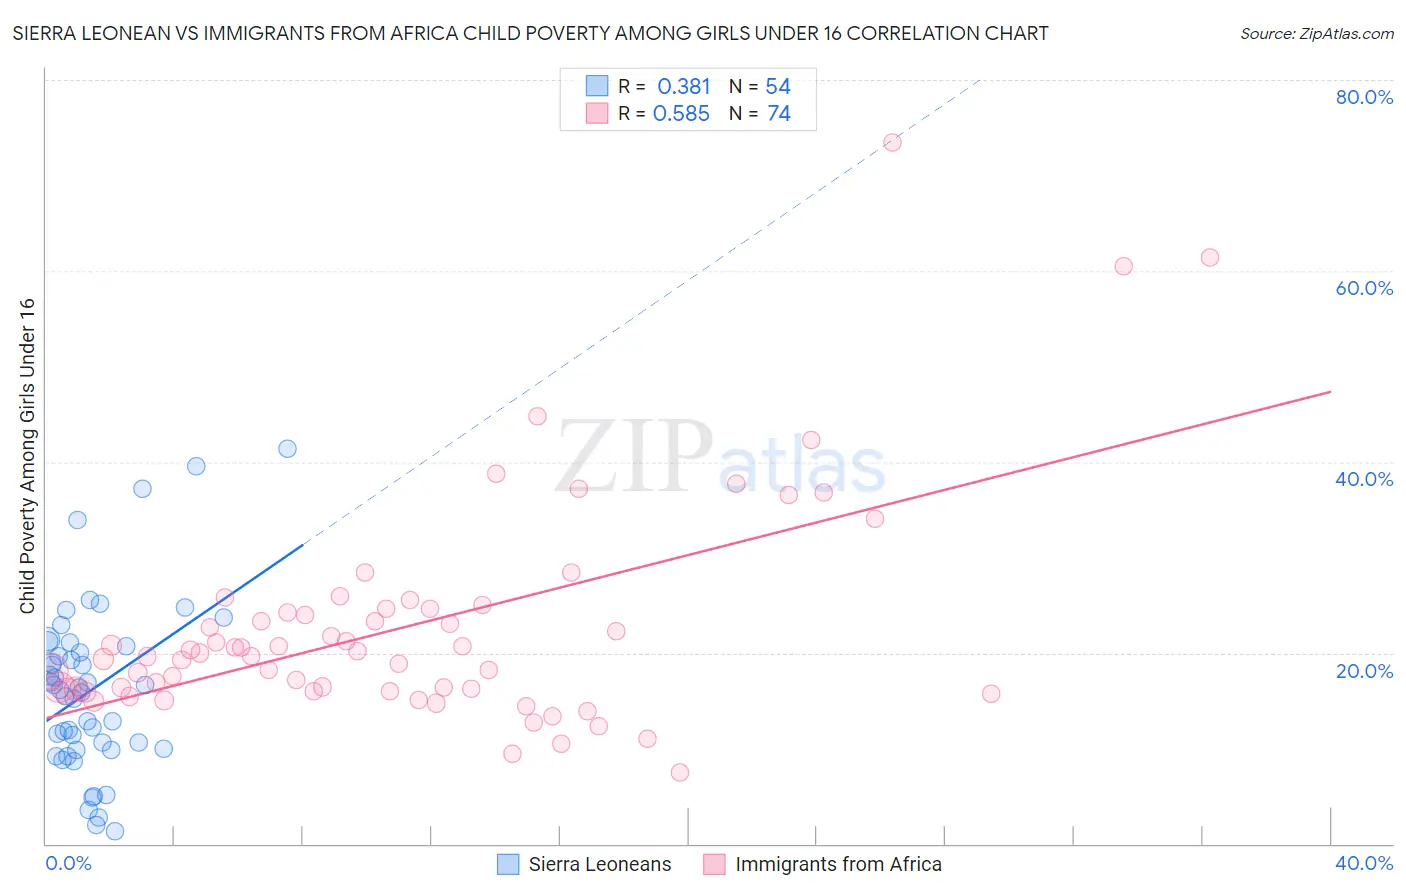 Sierra Leonean vs Immigrants from Africa Child Poverty Among Girls Under 16